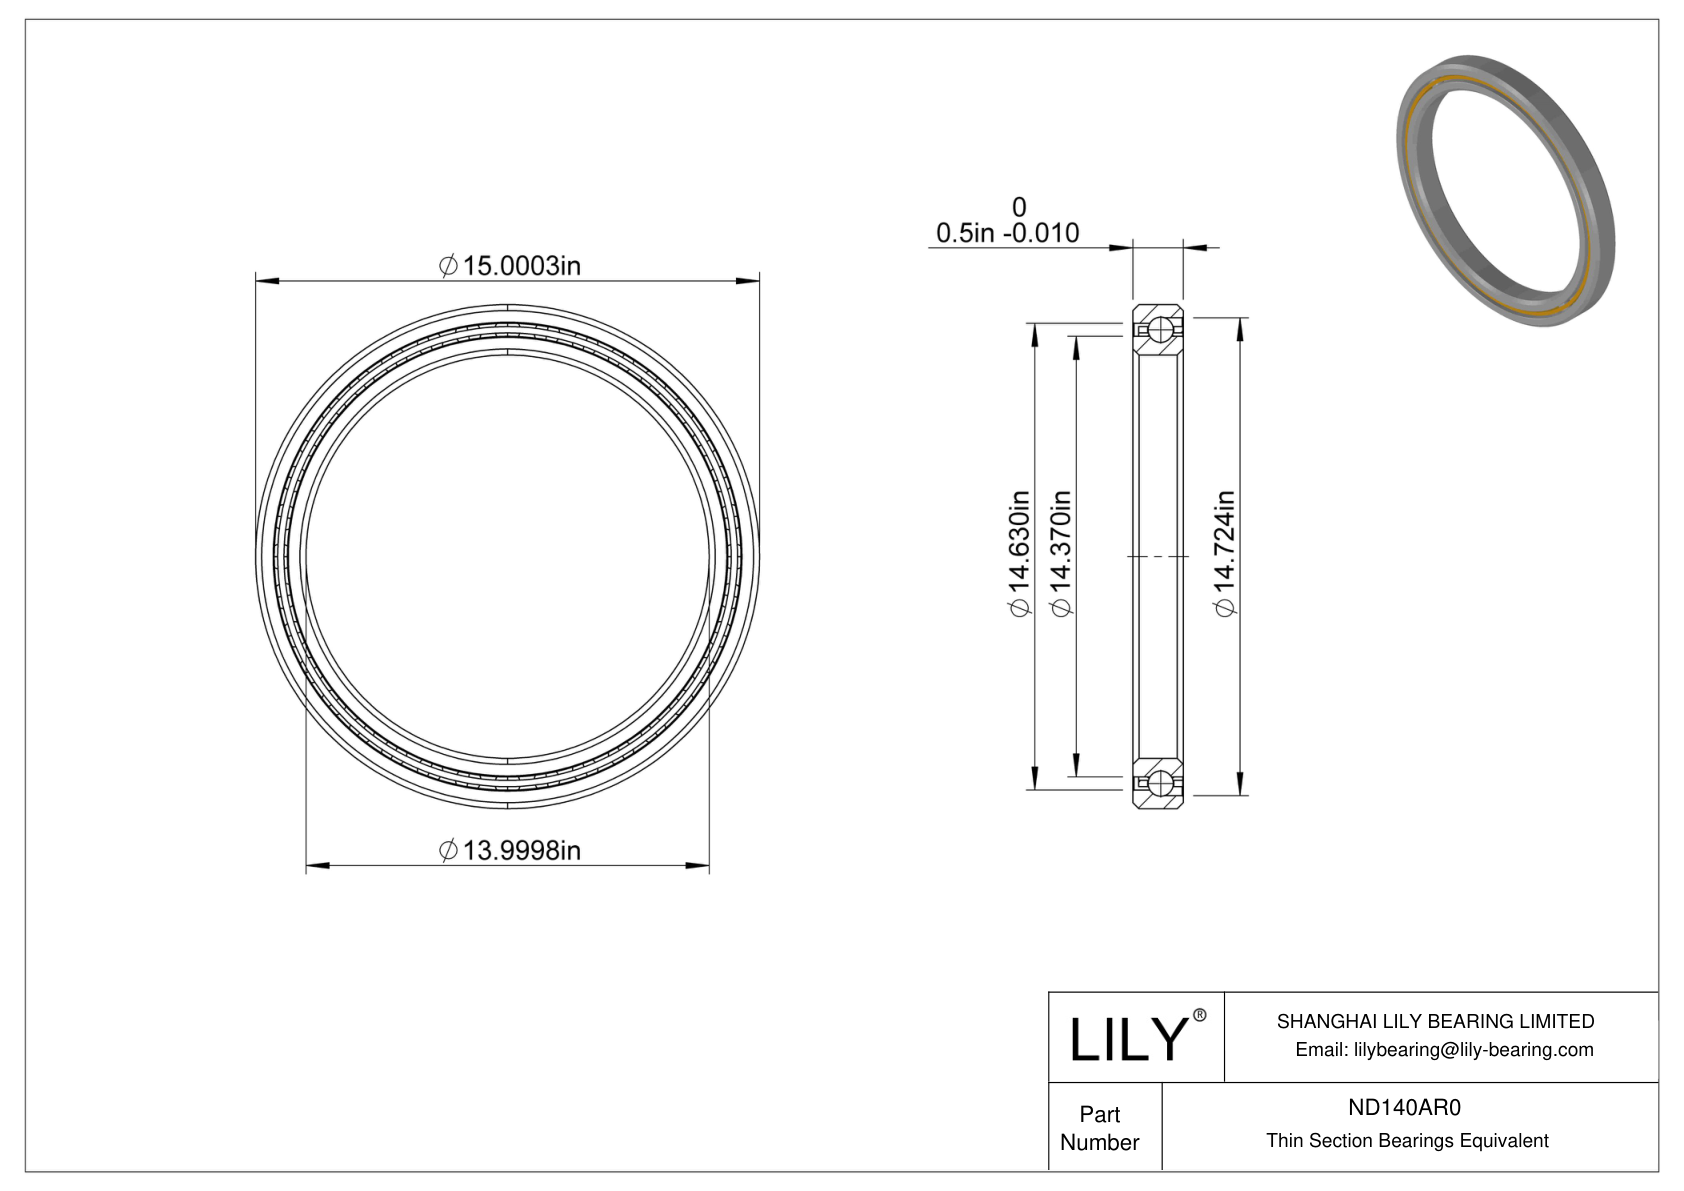 ND140AR0 Constant Section (CS) Bearings cad drawing